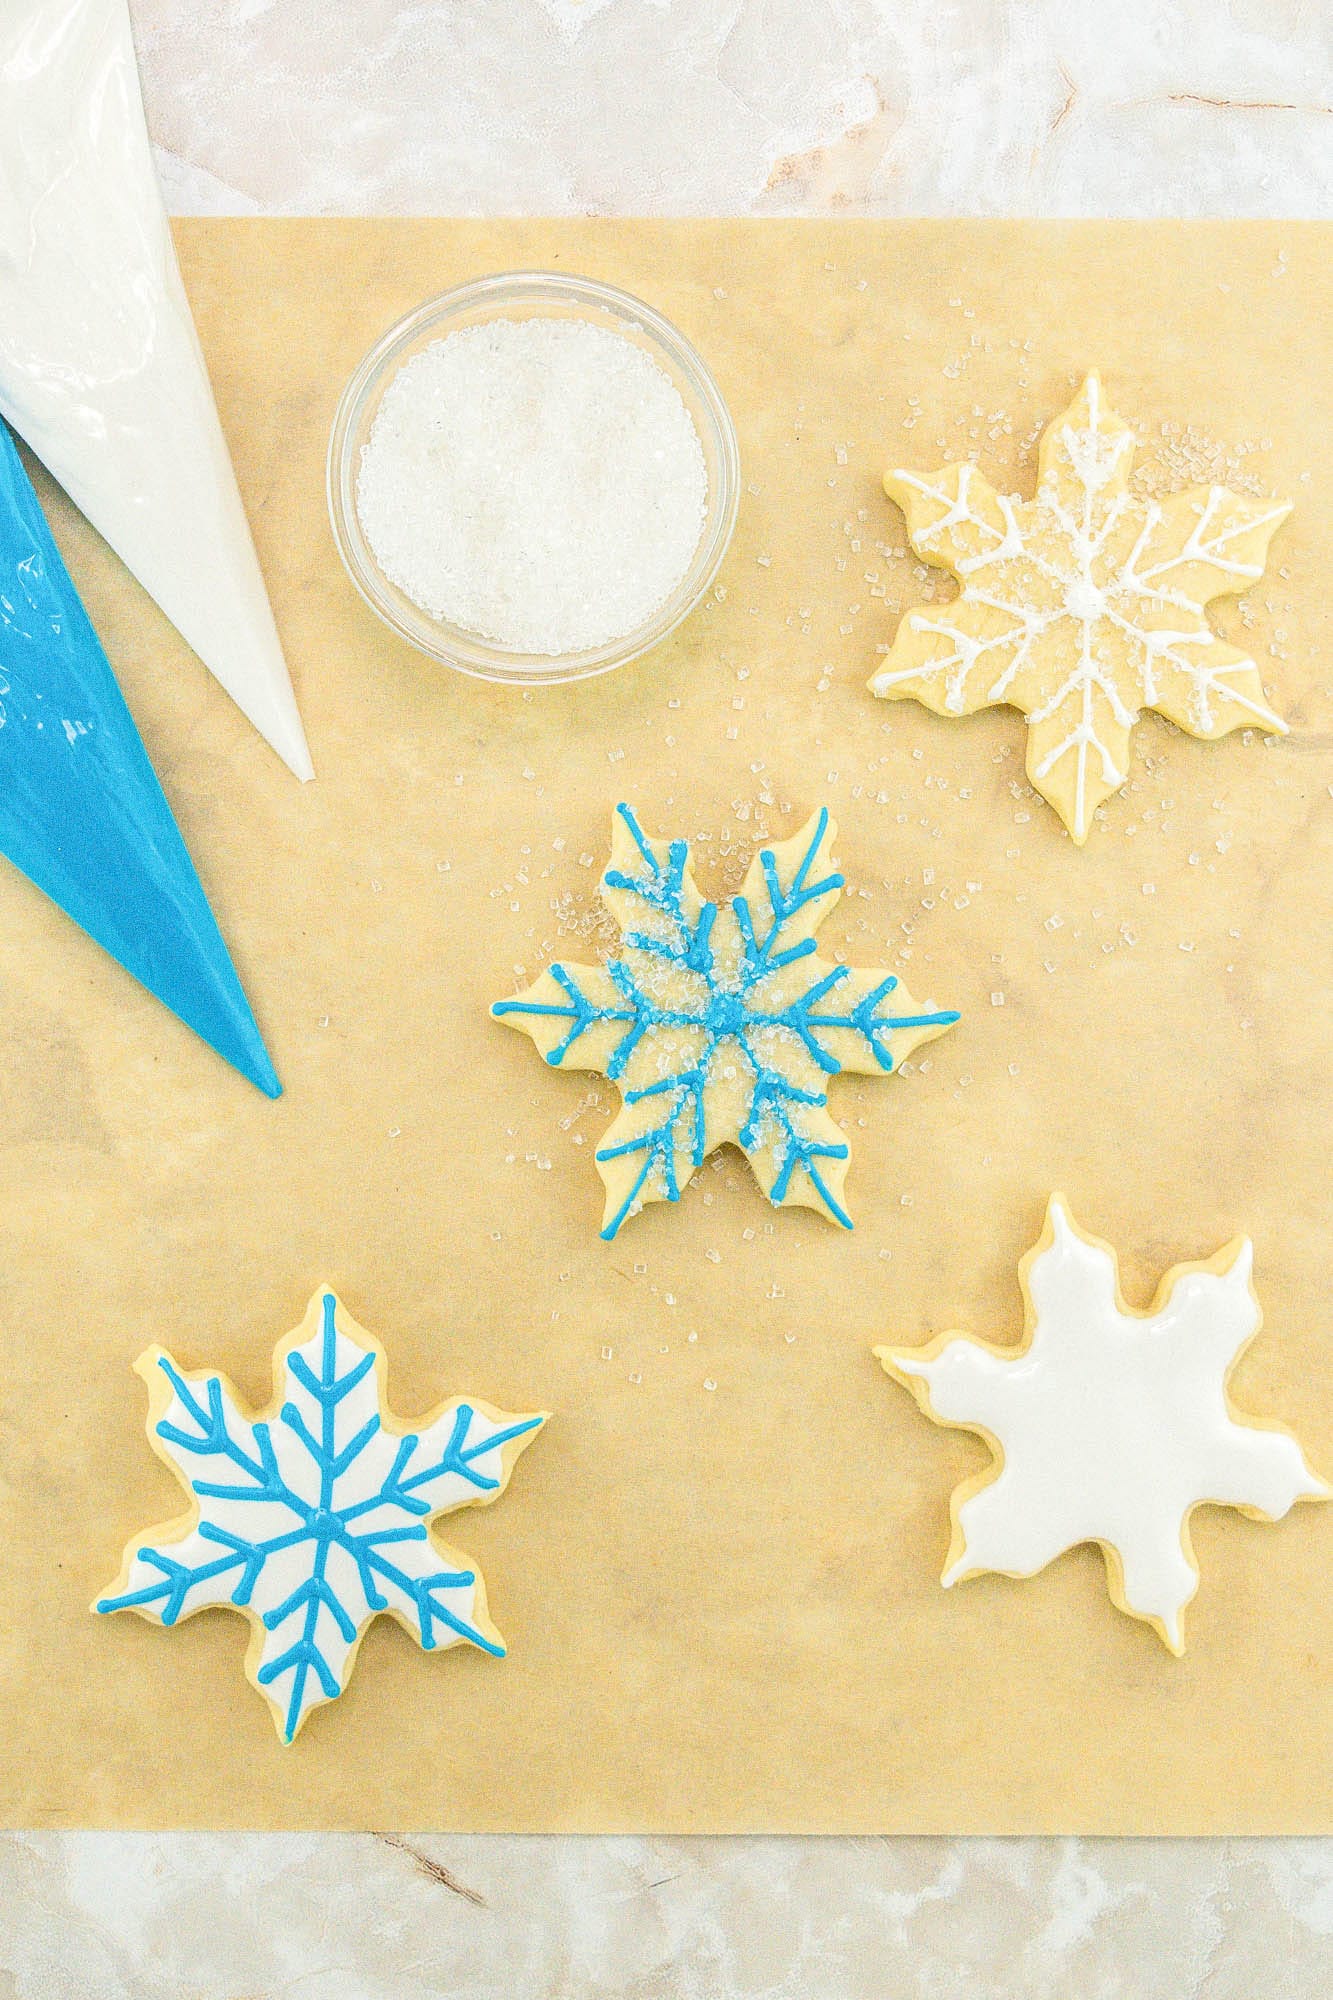 Decorated snowflake sugar cookies with blue and white royal icing